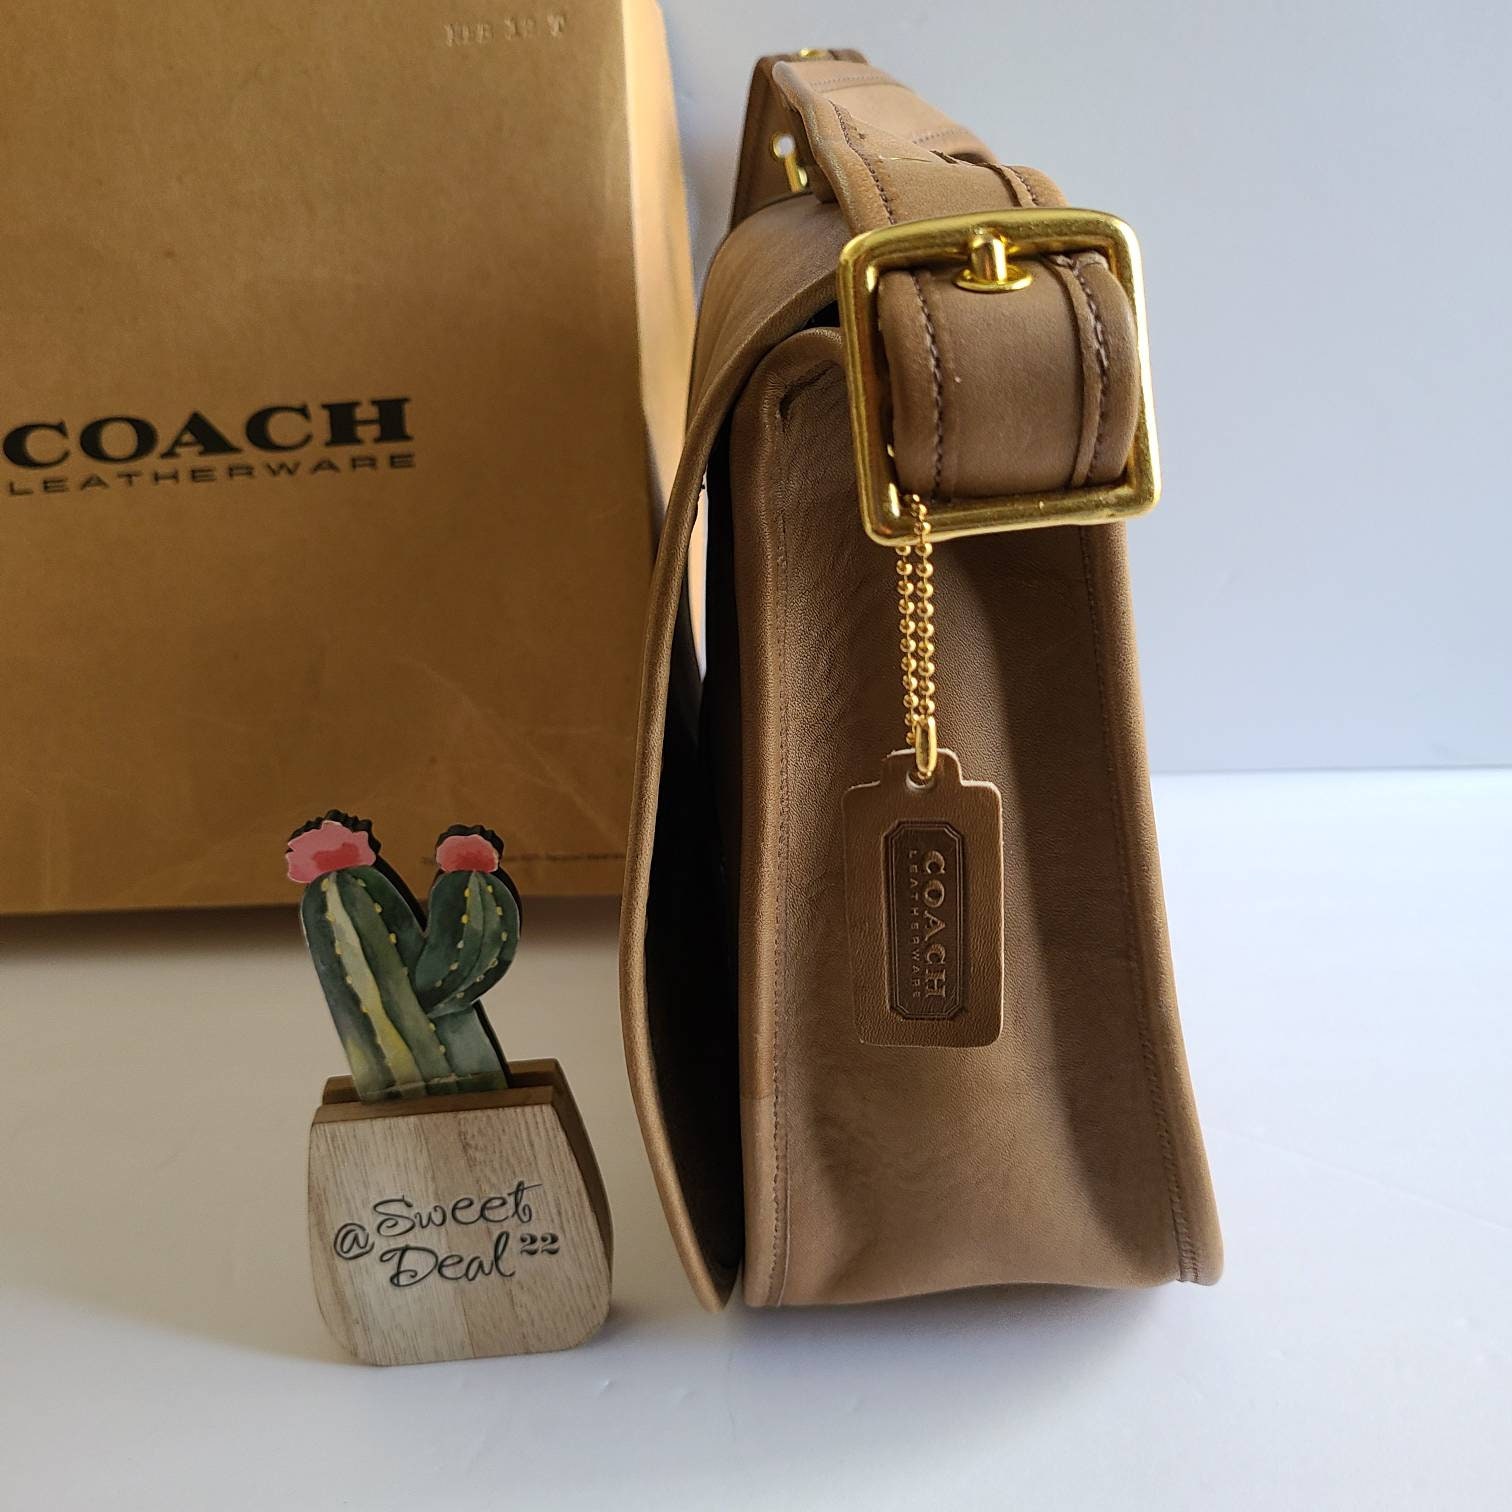 Coach Gift Box, Purse and Shoe Cake | Coach Gift Box, Coach … | Flickr